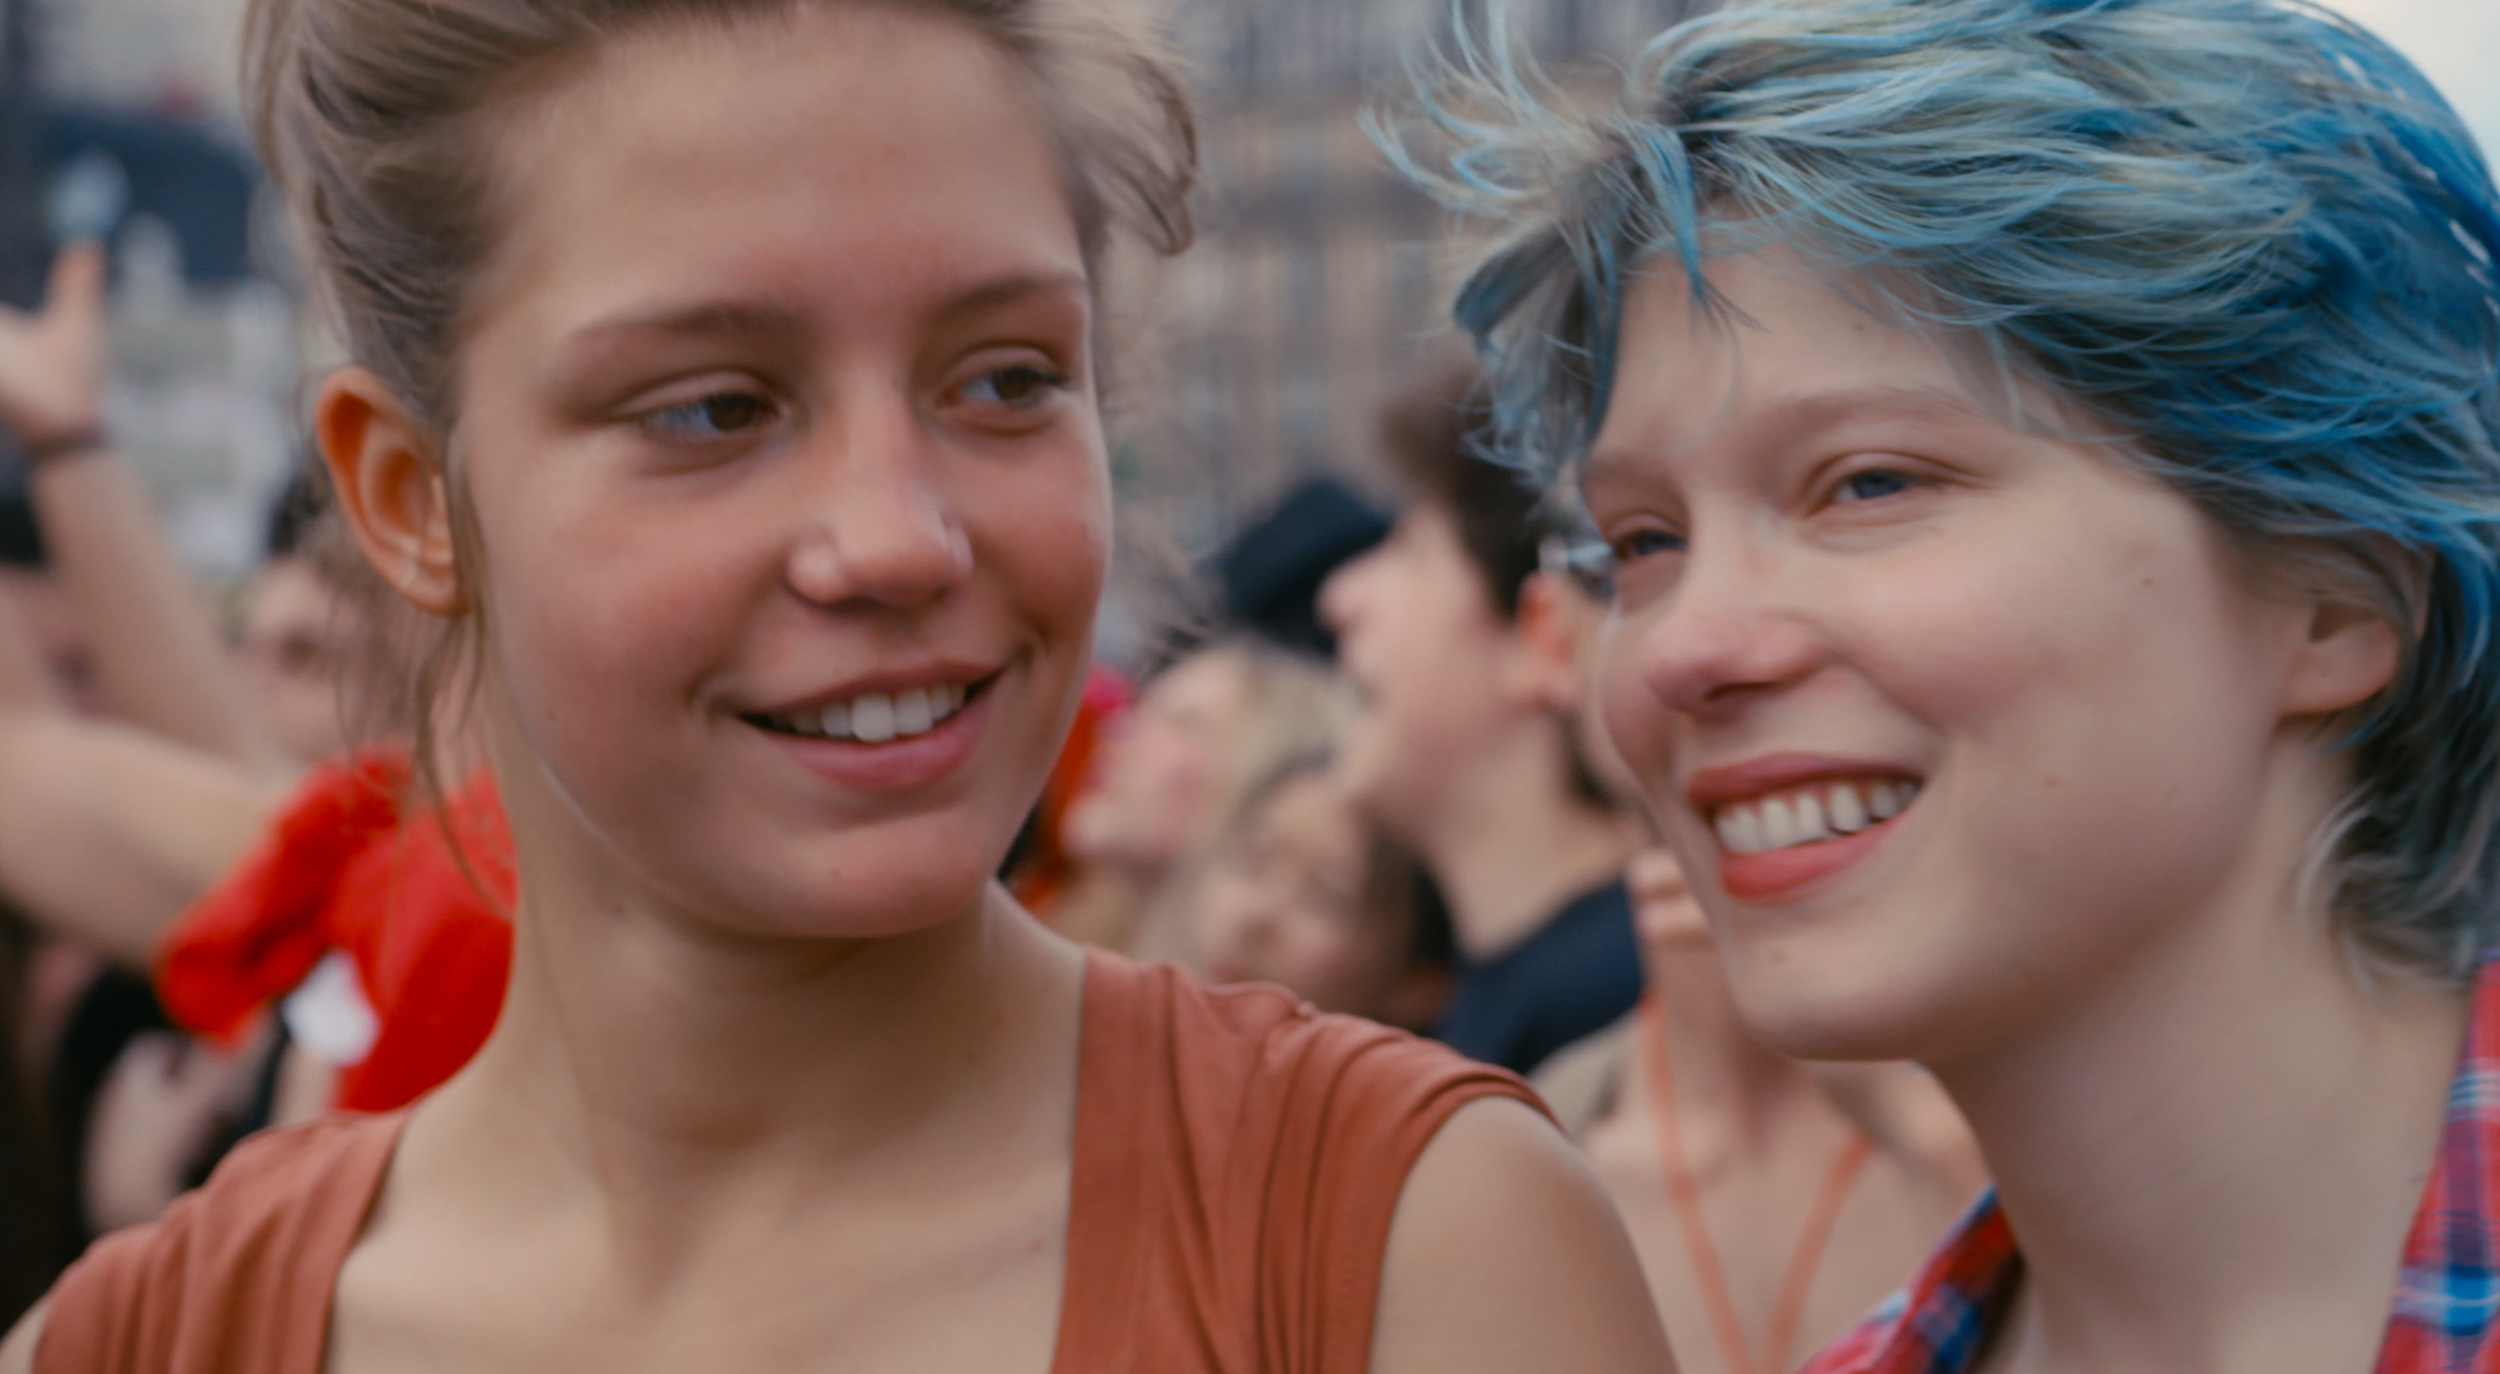 <p>Abdell Kechiche’s emotional epic charts the sexual awakening of a teenaged girl (Adèle Exarchopoulos) who falls hard for a beguiling blue-haired art student (Léa Seydoux). It’s an overpowering, erotically charged depiction of first love — a portrait of longing, consummation and the madness that comes with it. The leads are exceptional (despite the reportedly caustic behavior of their director on set), imbuing the familiar relationship arc with a depth of feeling that stays with you long after the film’s conclusion.</p><p>You may also like: <a href='https://www.yardbarker.com/entertainment/articles/the_best_movies_to_lose_best_picture_at_the_oscars_031924/s1__38632601'>The best movies to lose Best Picture at the Oscars</a></p>